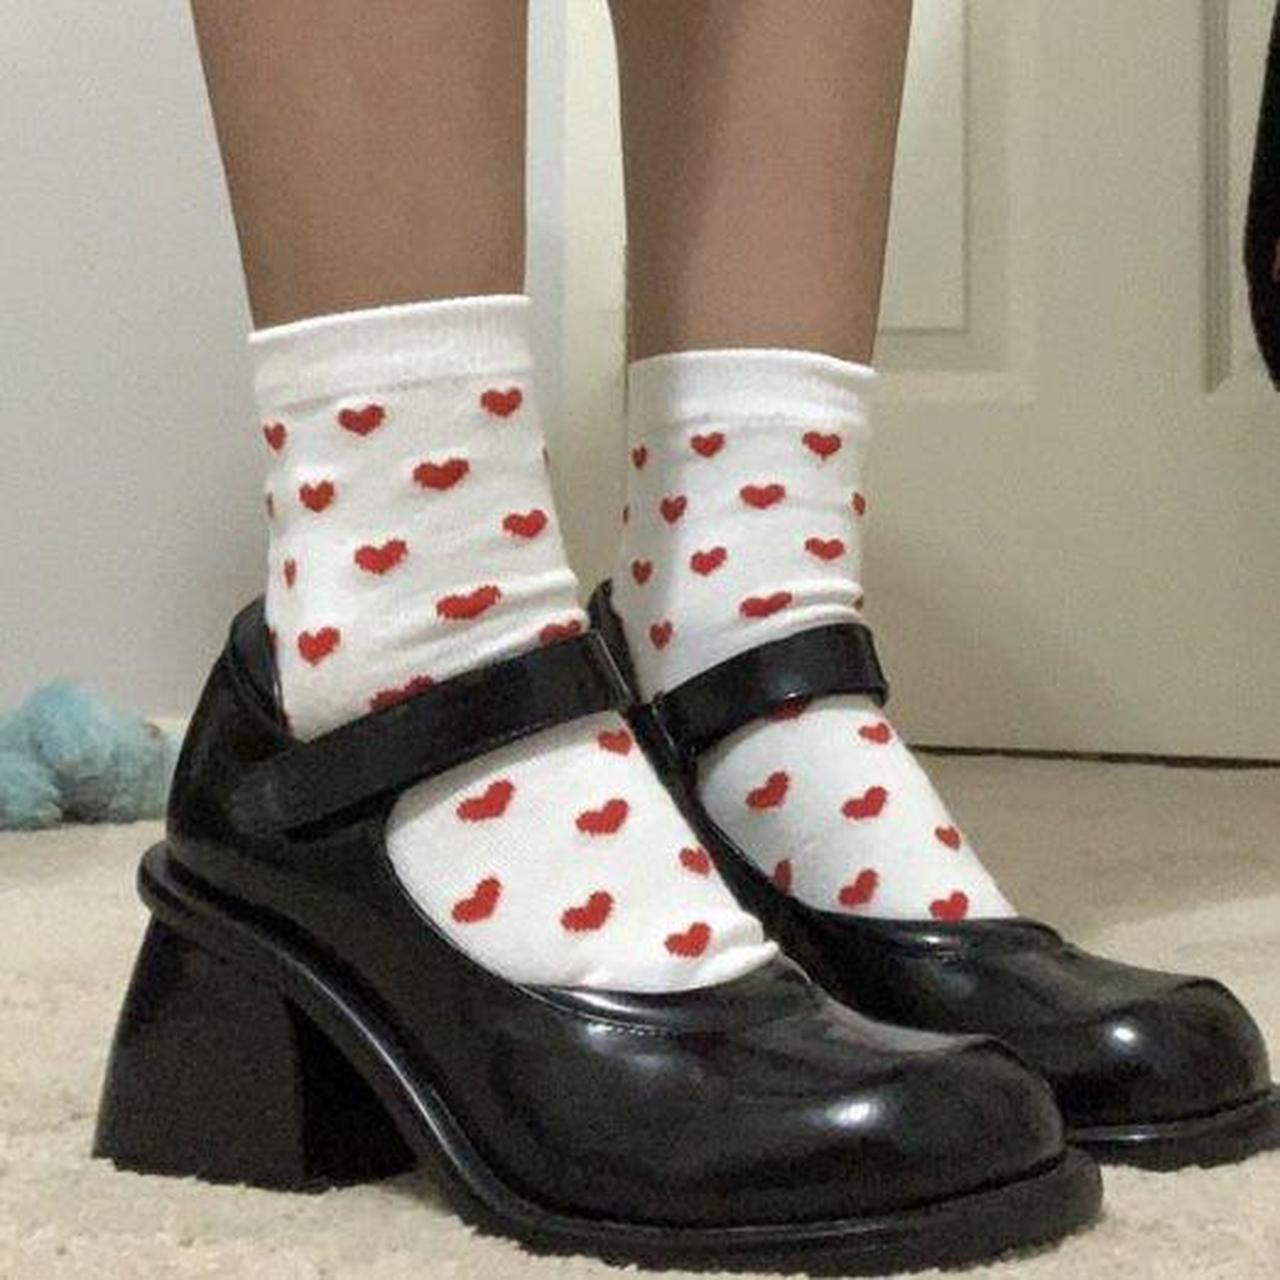 Unif dot Mary Jane shoes, the most beautiful shoes - Depop